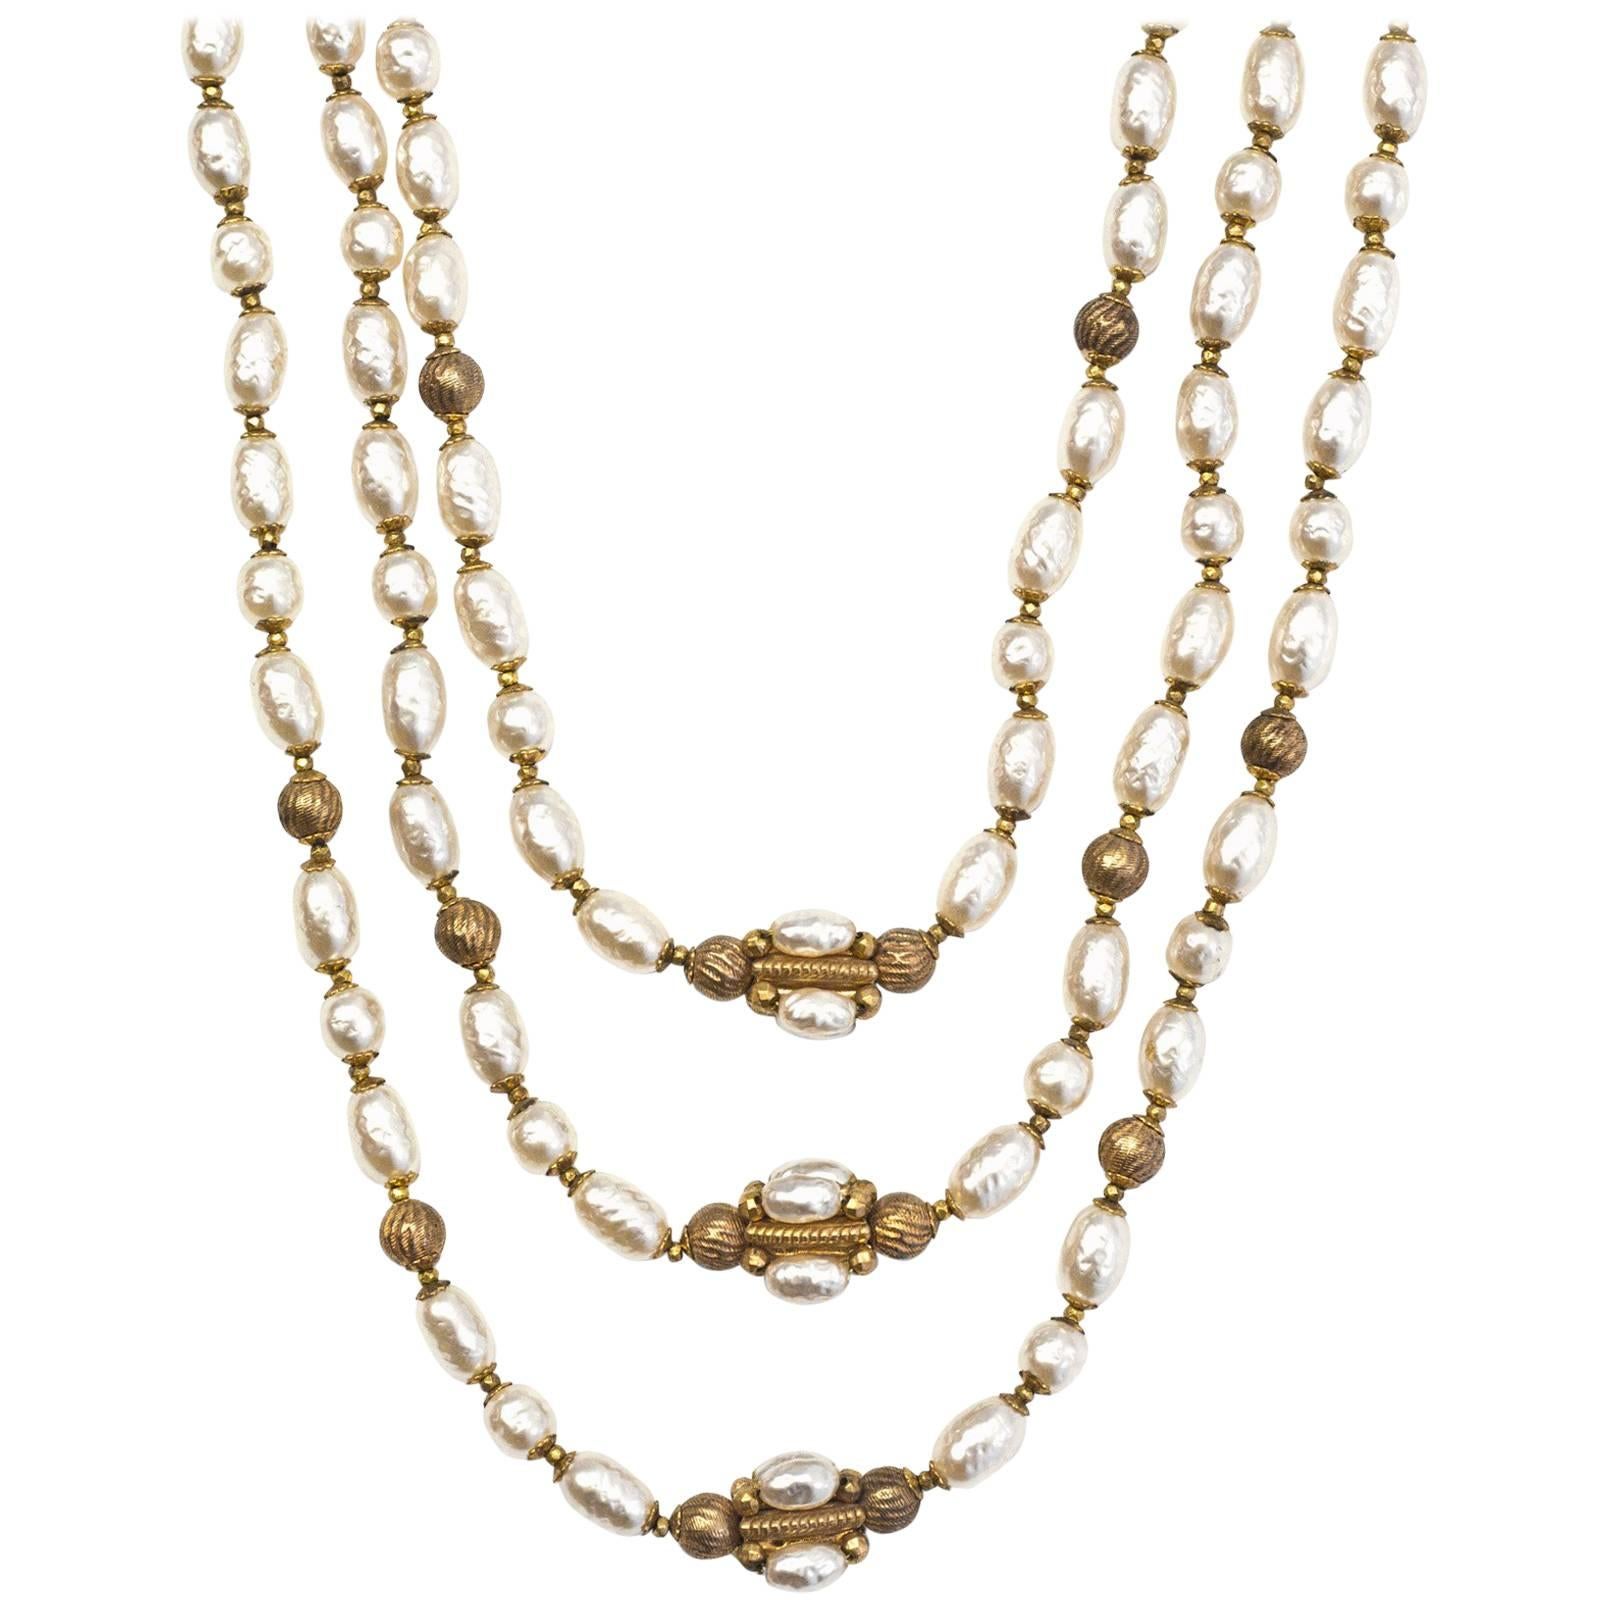 Miriam Haskell Goldtone and Faux Pearl Necklace